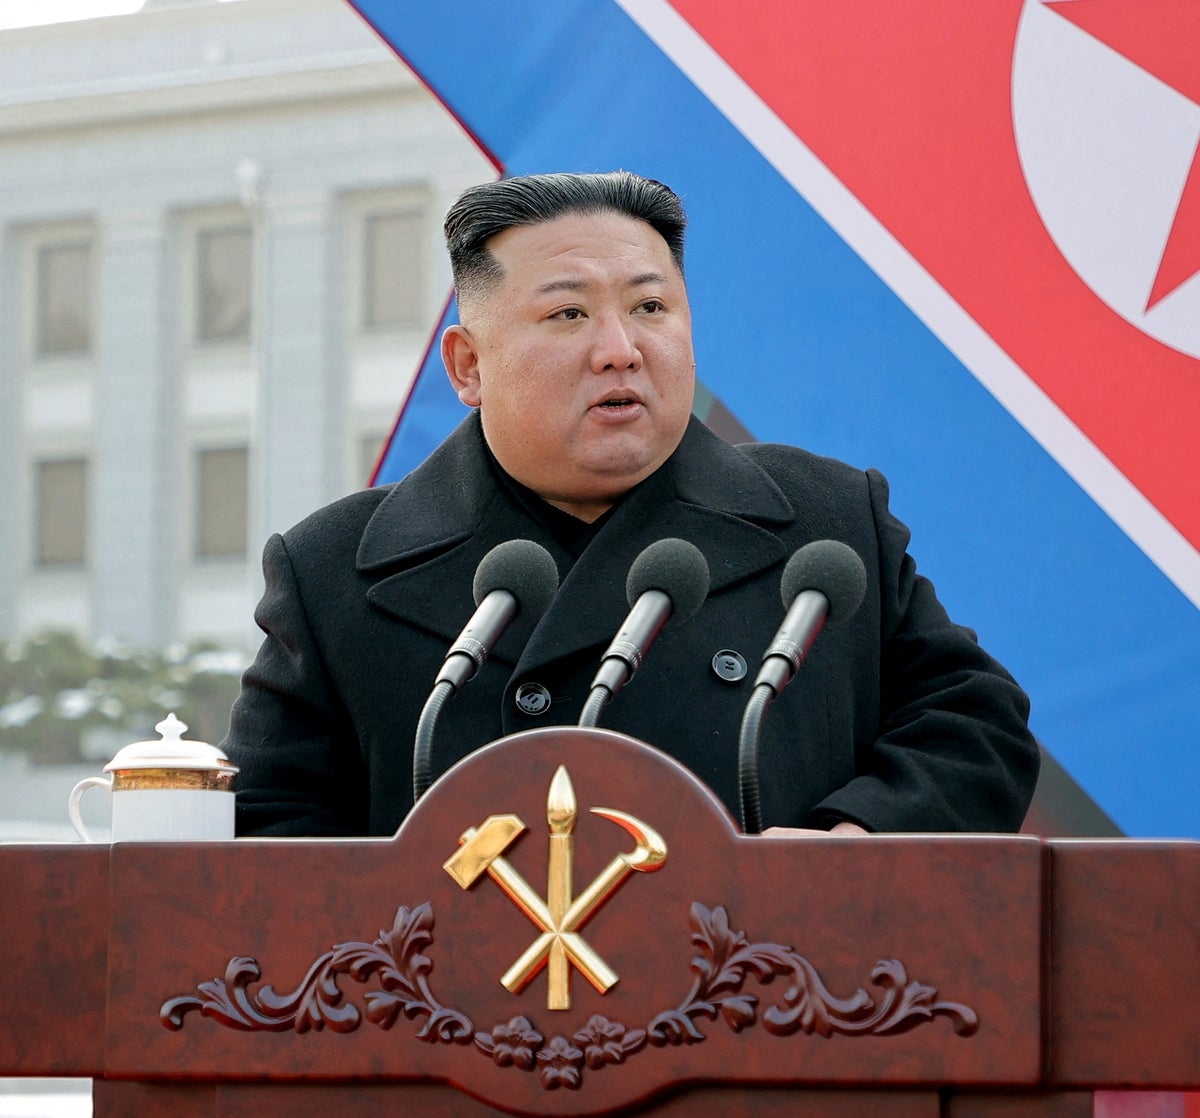 Kim Jong-un rings in new year by ordering ‘exponential increase’ of North Korea’s nuclear arsenal